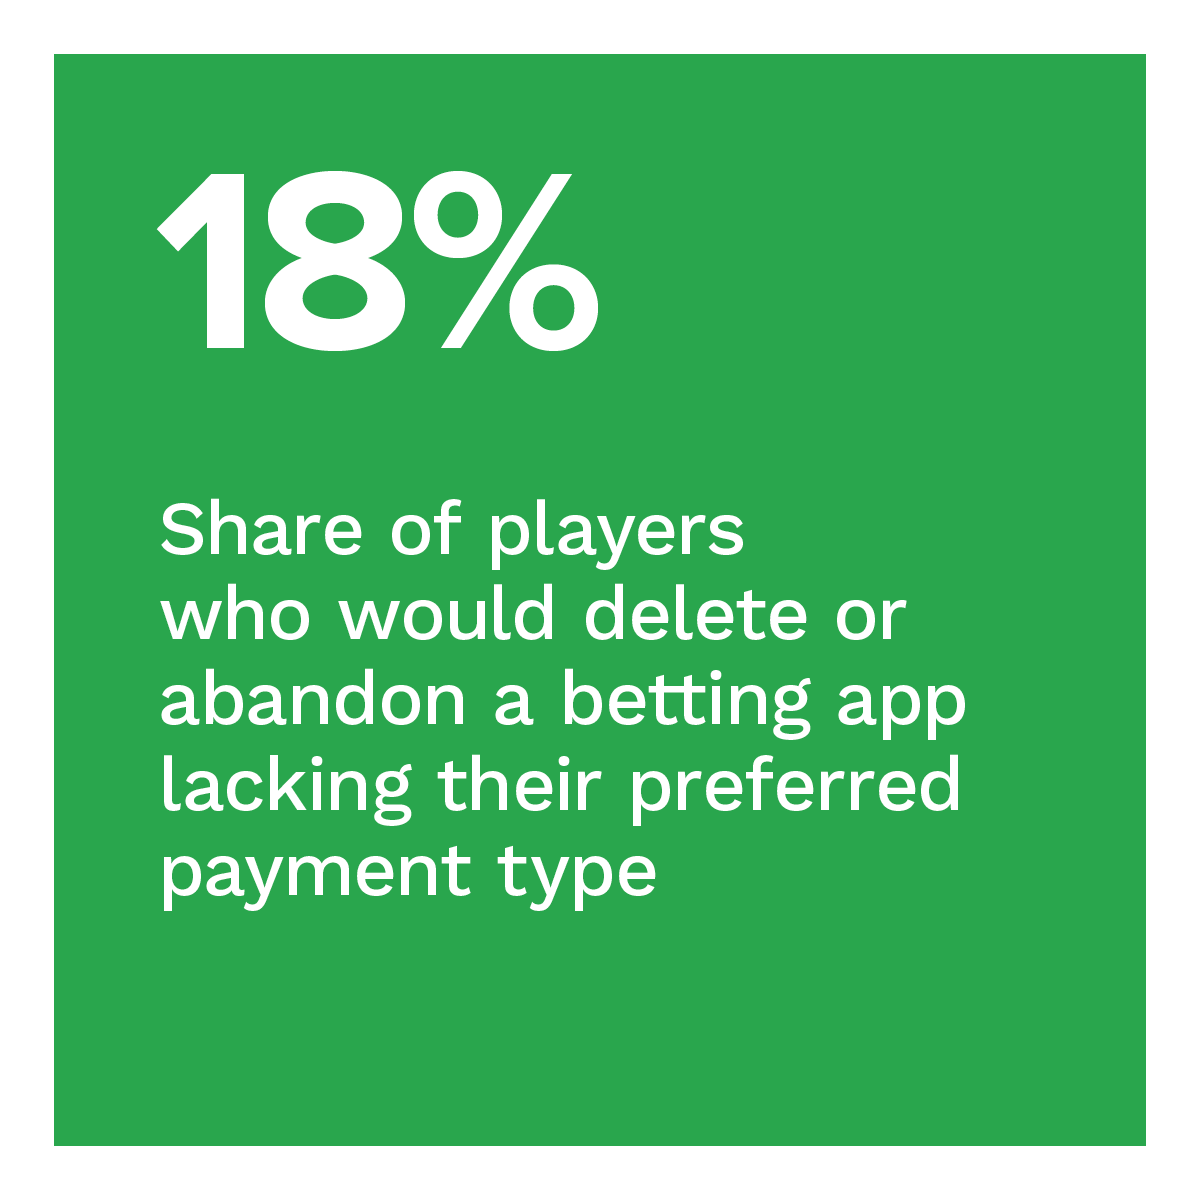 18%: Share of players who would delete or abandon a betting app lacking their preferred payment type